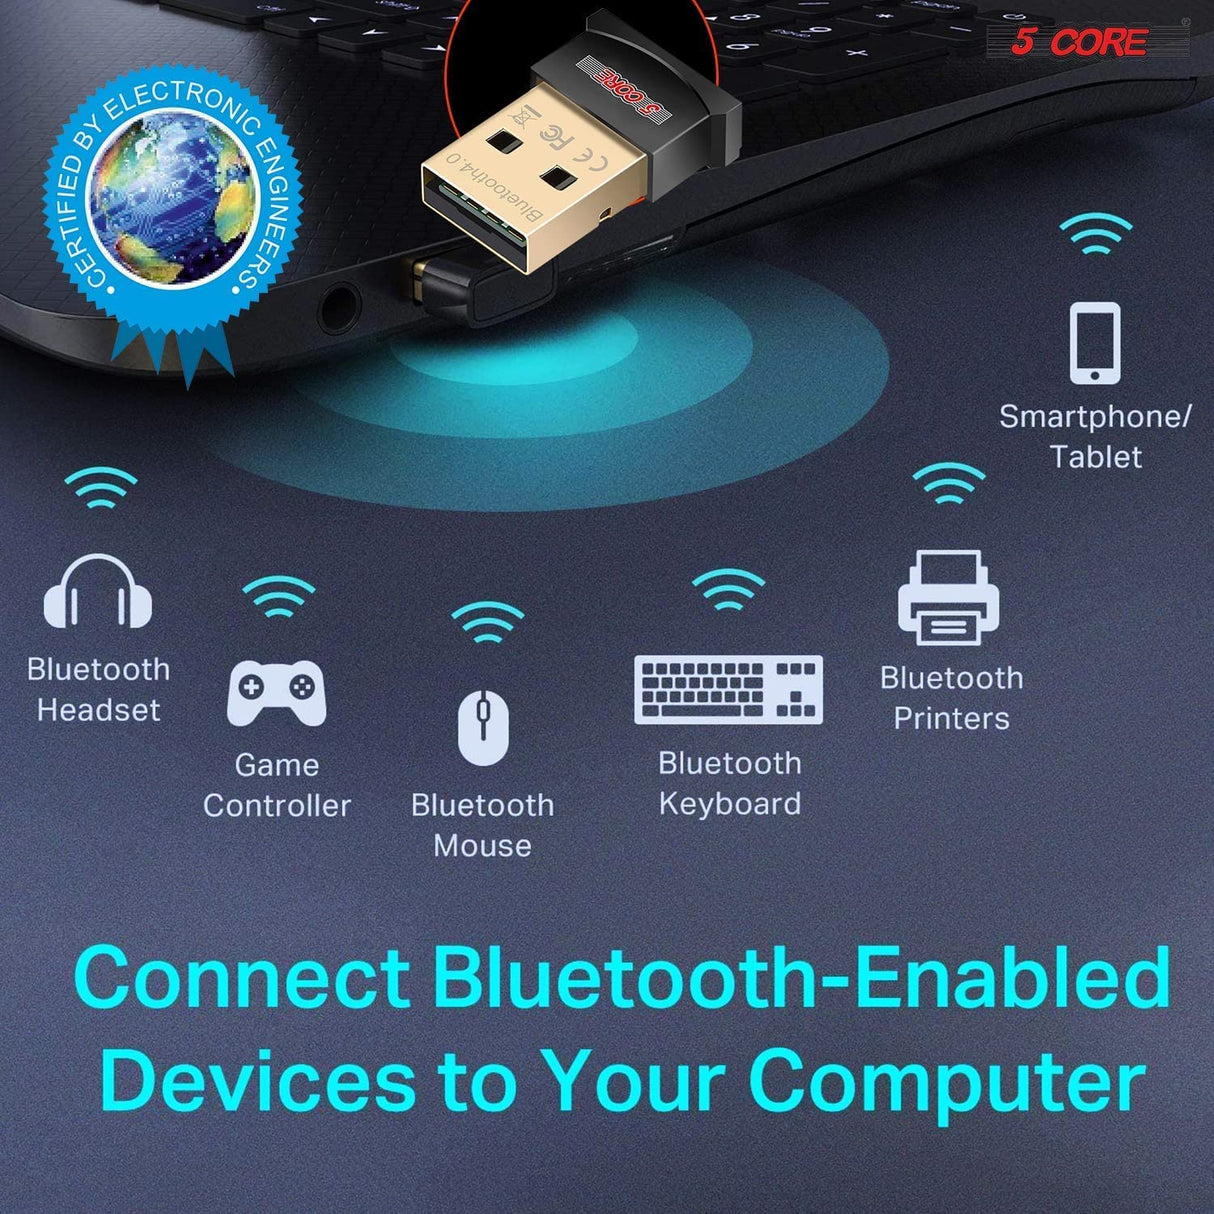 100 Pack Bluetooth 4.0 USB 2.0 CSR 4.0 Dongle Adapter for PC LAPTOP WinXP 7 8 10 DONGLE BT 100PCS